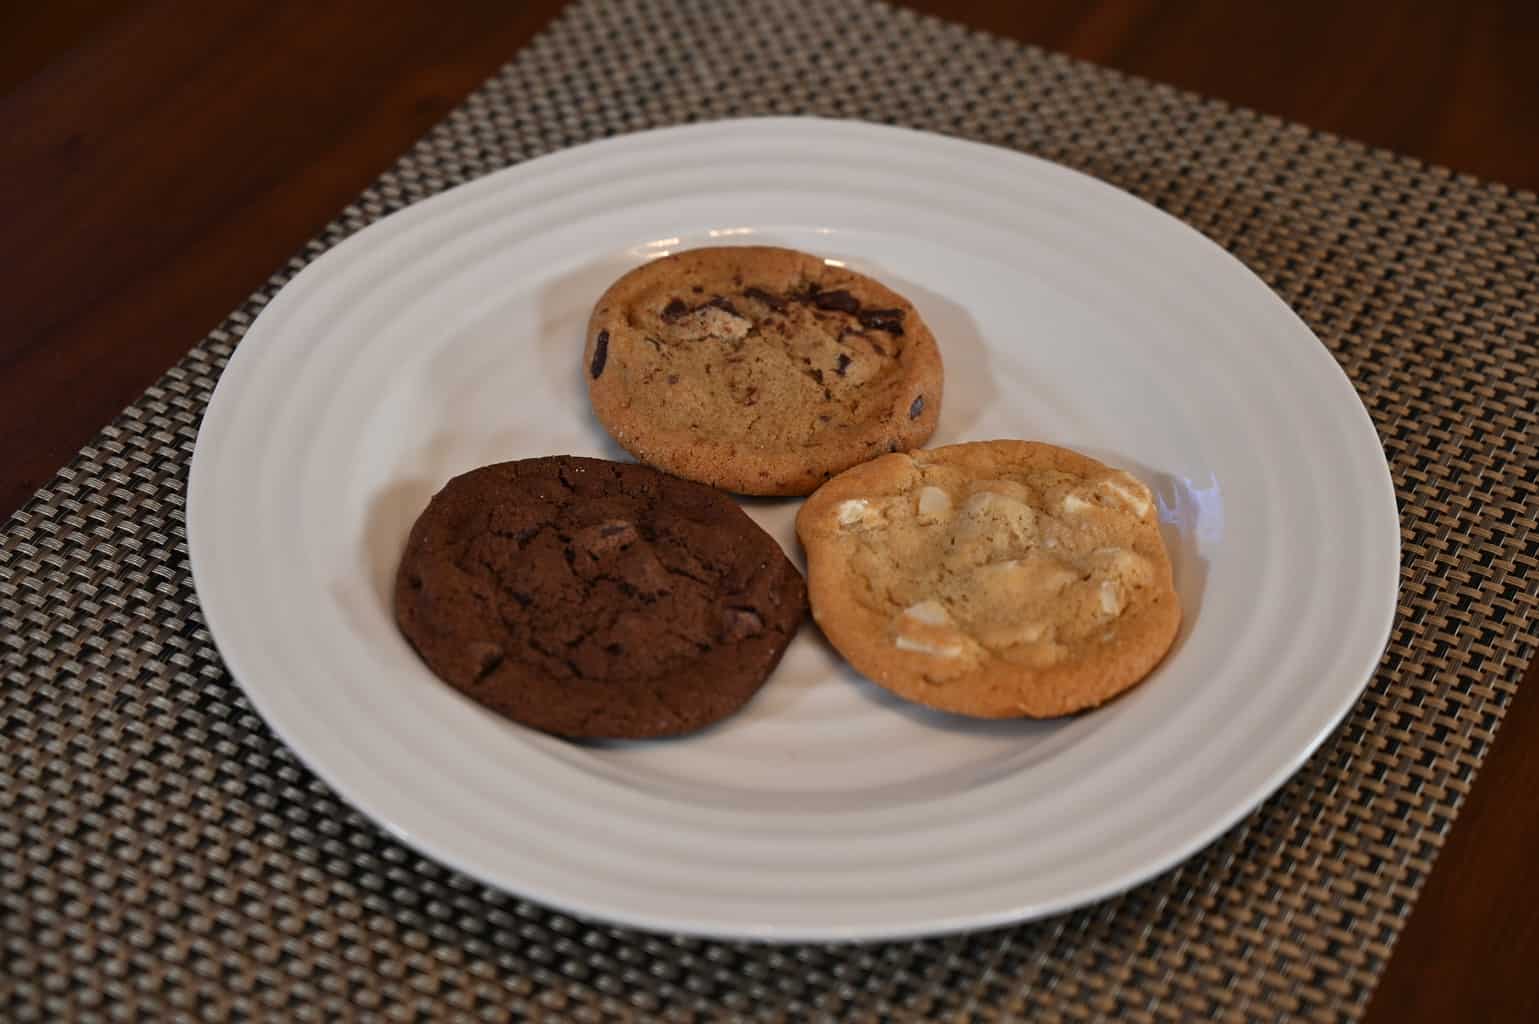 A white chocolate macadamia nut cookie, a triple chocolate cookie and a chocolate chunk cookie on a plate photographed from the side.